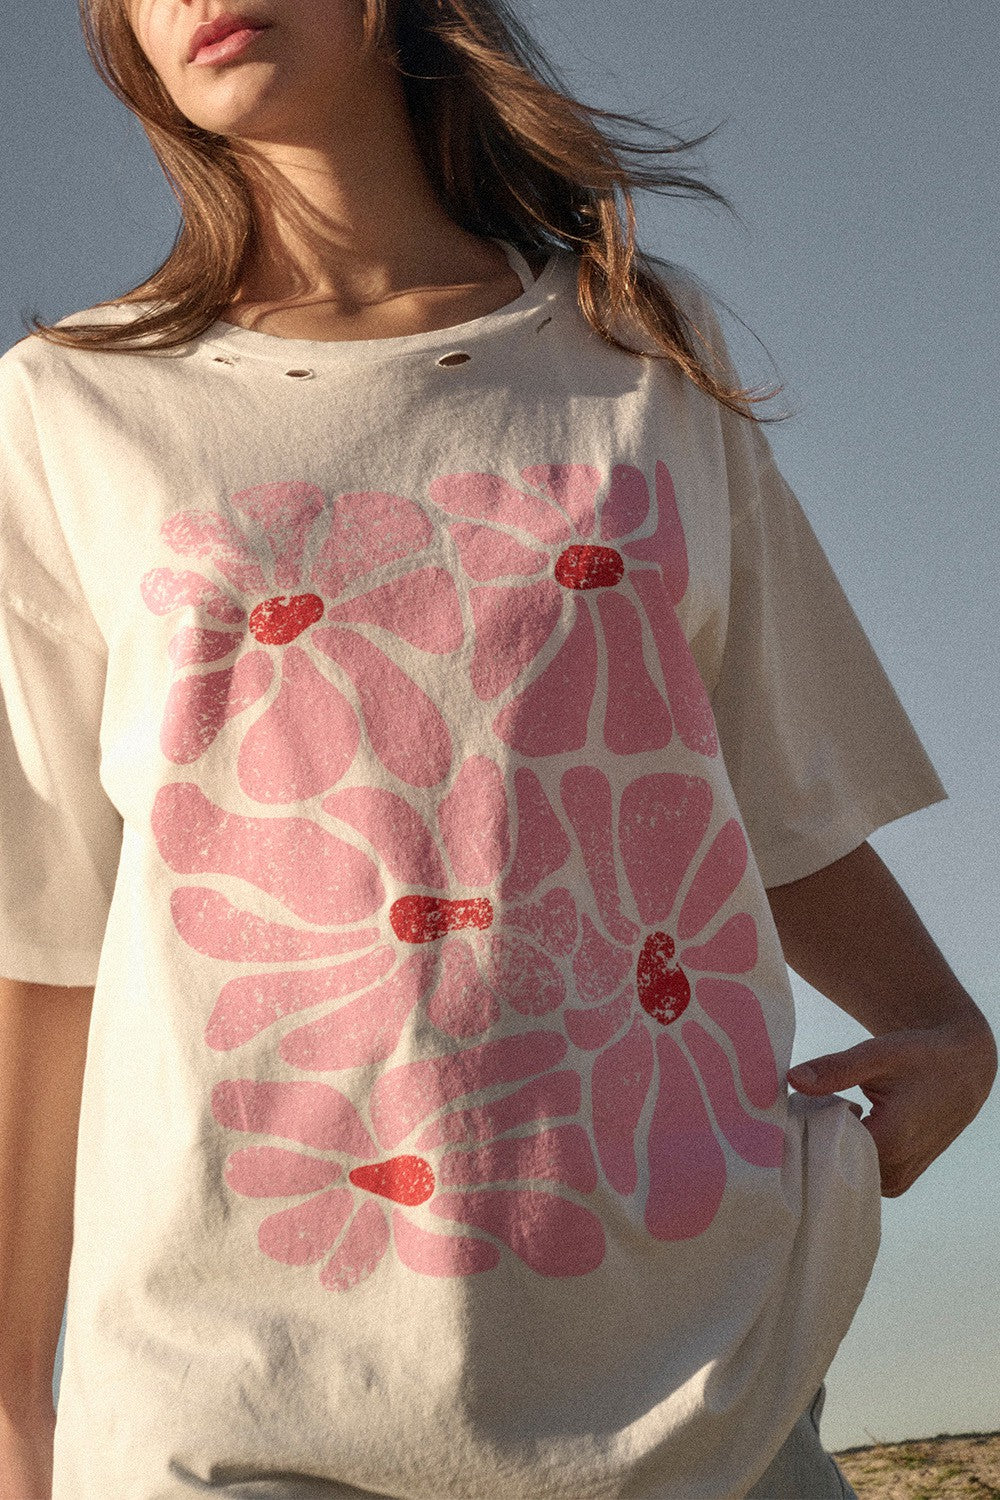 The Distressed Flower Graphic Tee